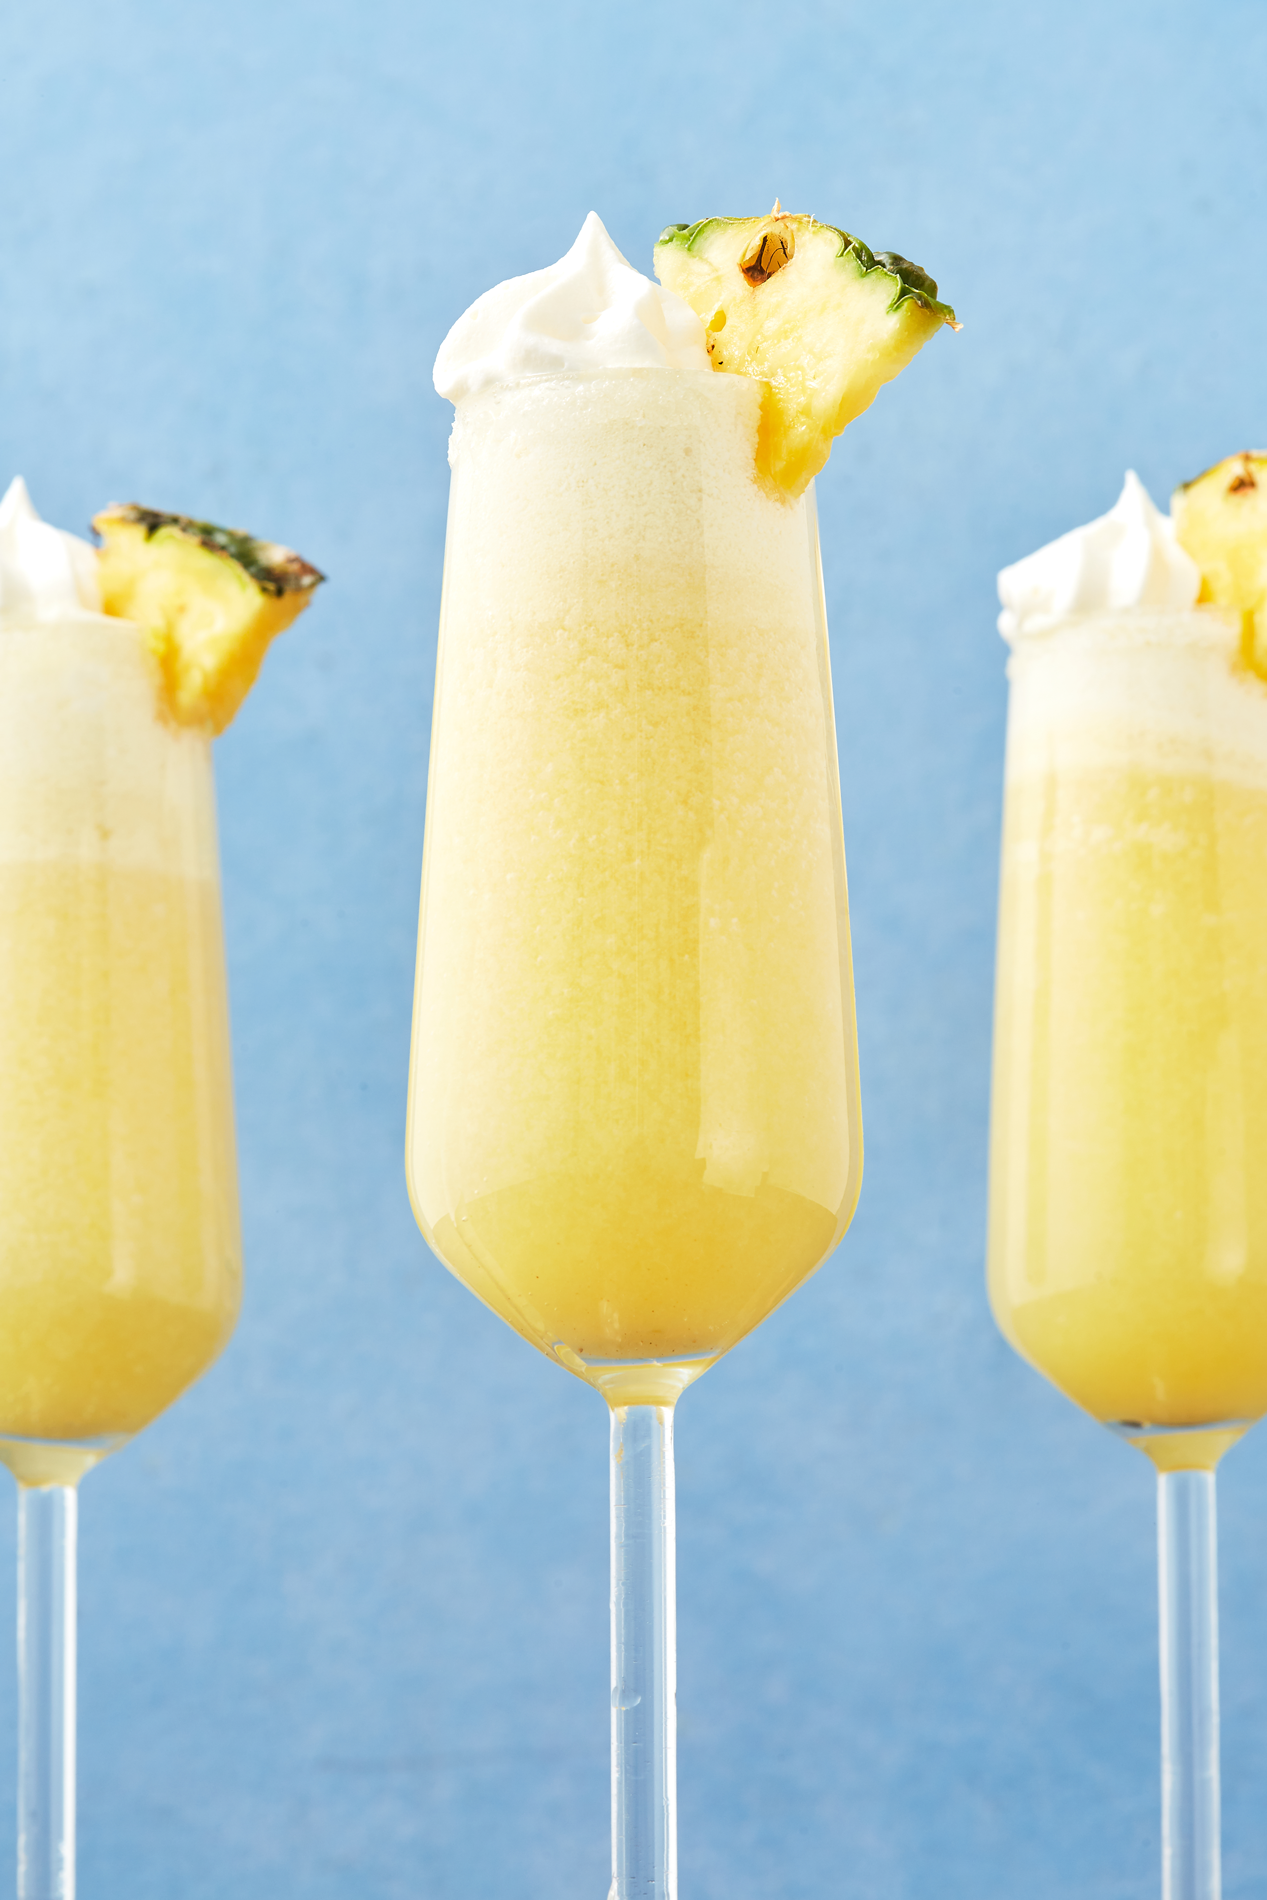 https://hips.hearstapps.com/hmg-prod/images/190502-dole-whip-mimosa-vertical-4-1557942887.png